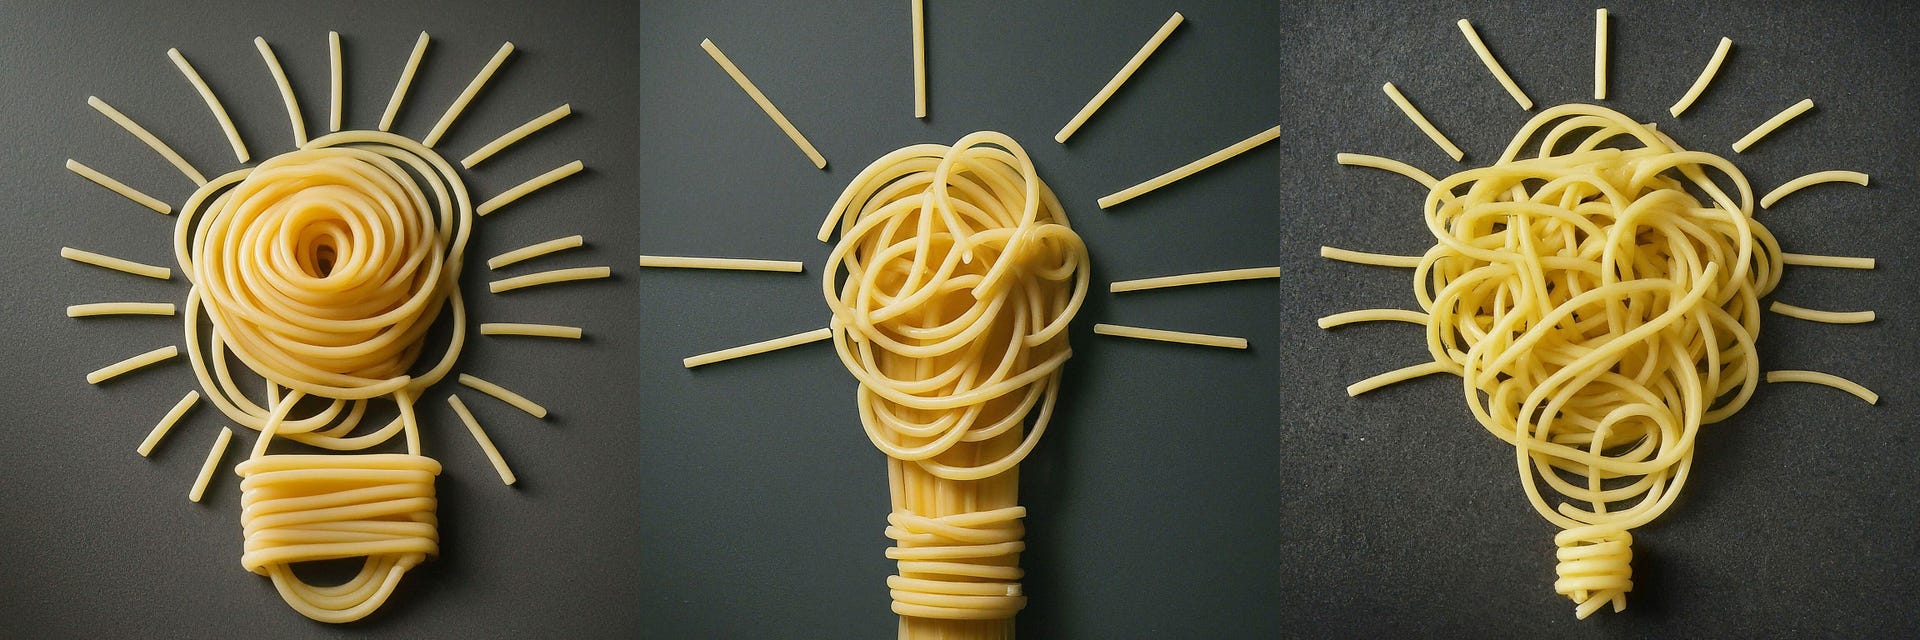 Three AI-generated images of a light bulb drawn out of spaghetti strands.